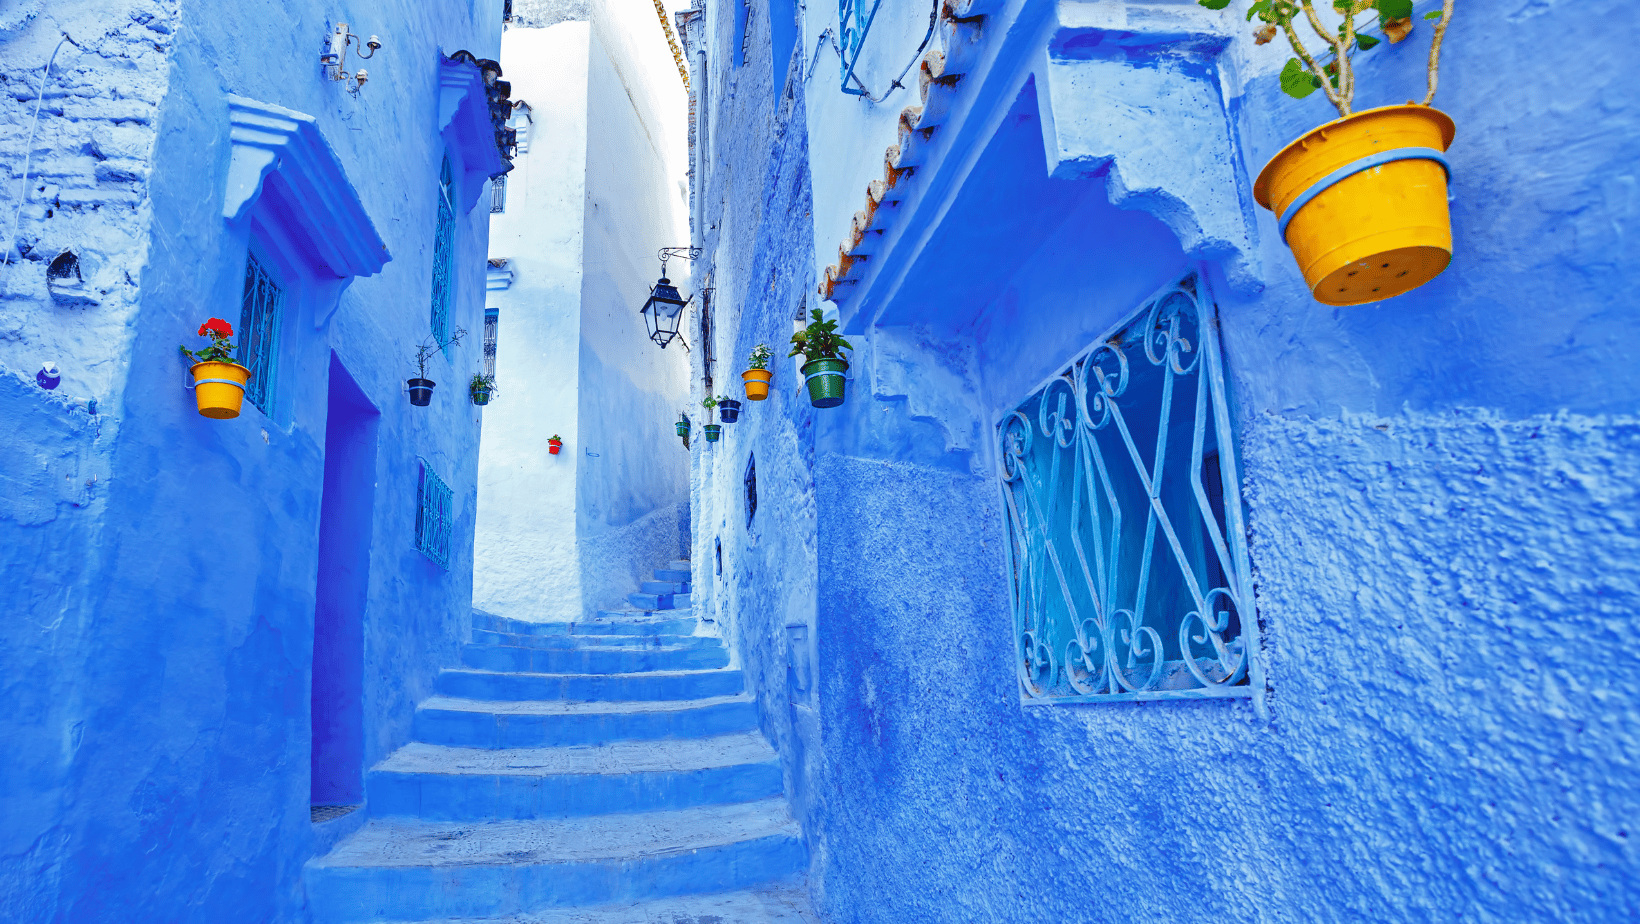 1 DAY TRIP FROM FEZ TO CHEFCHAOUEN